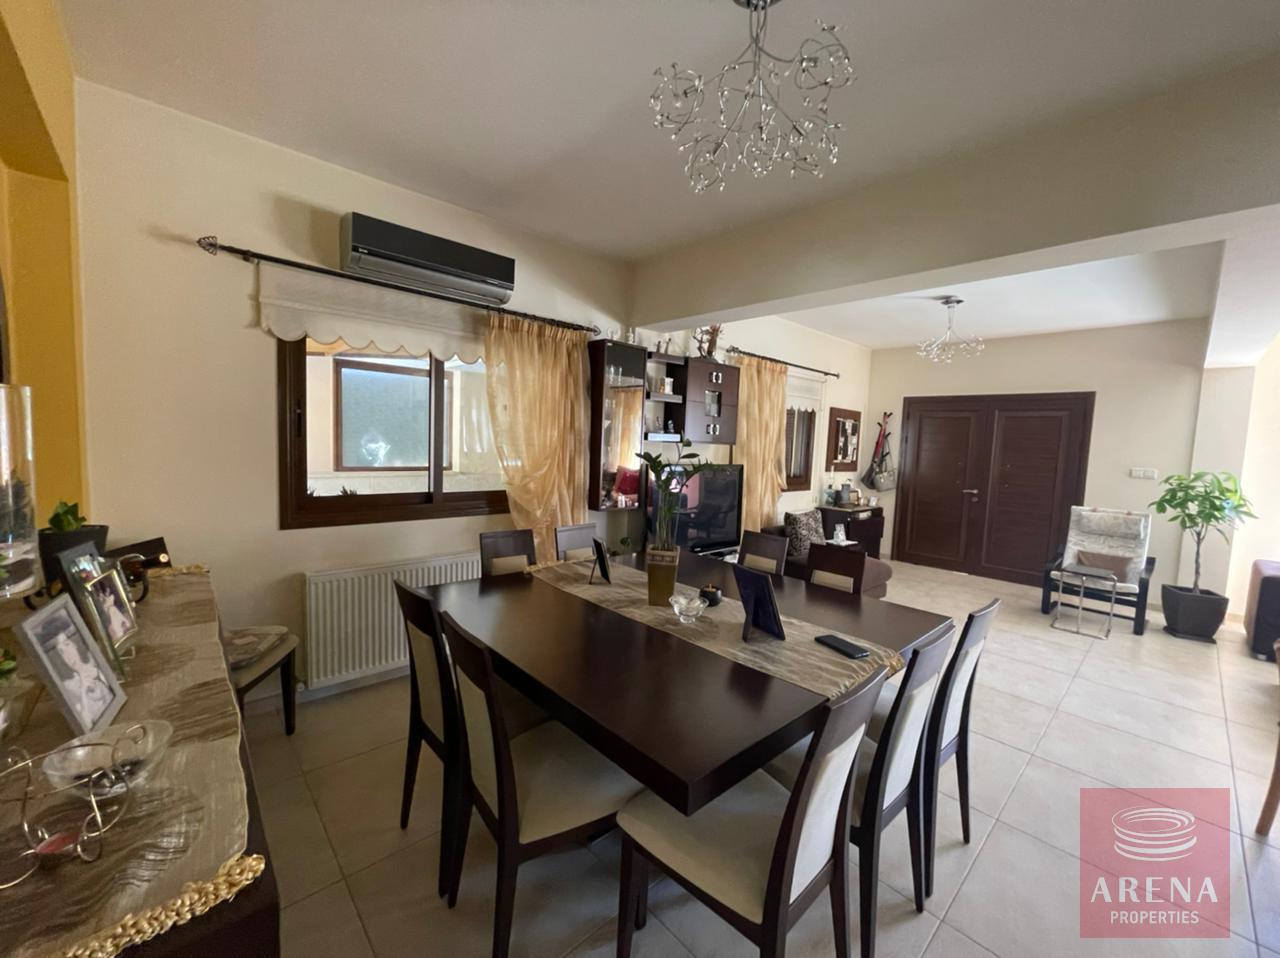 3 bed villa for sale in Strovolos - dining area